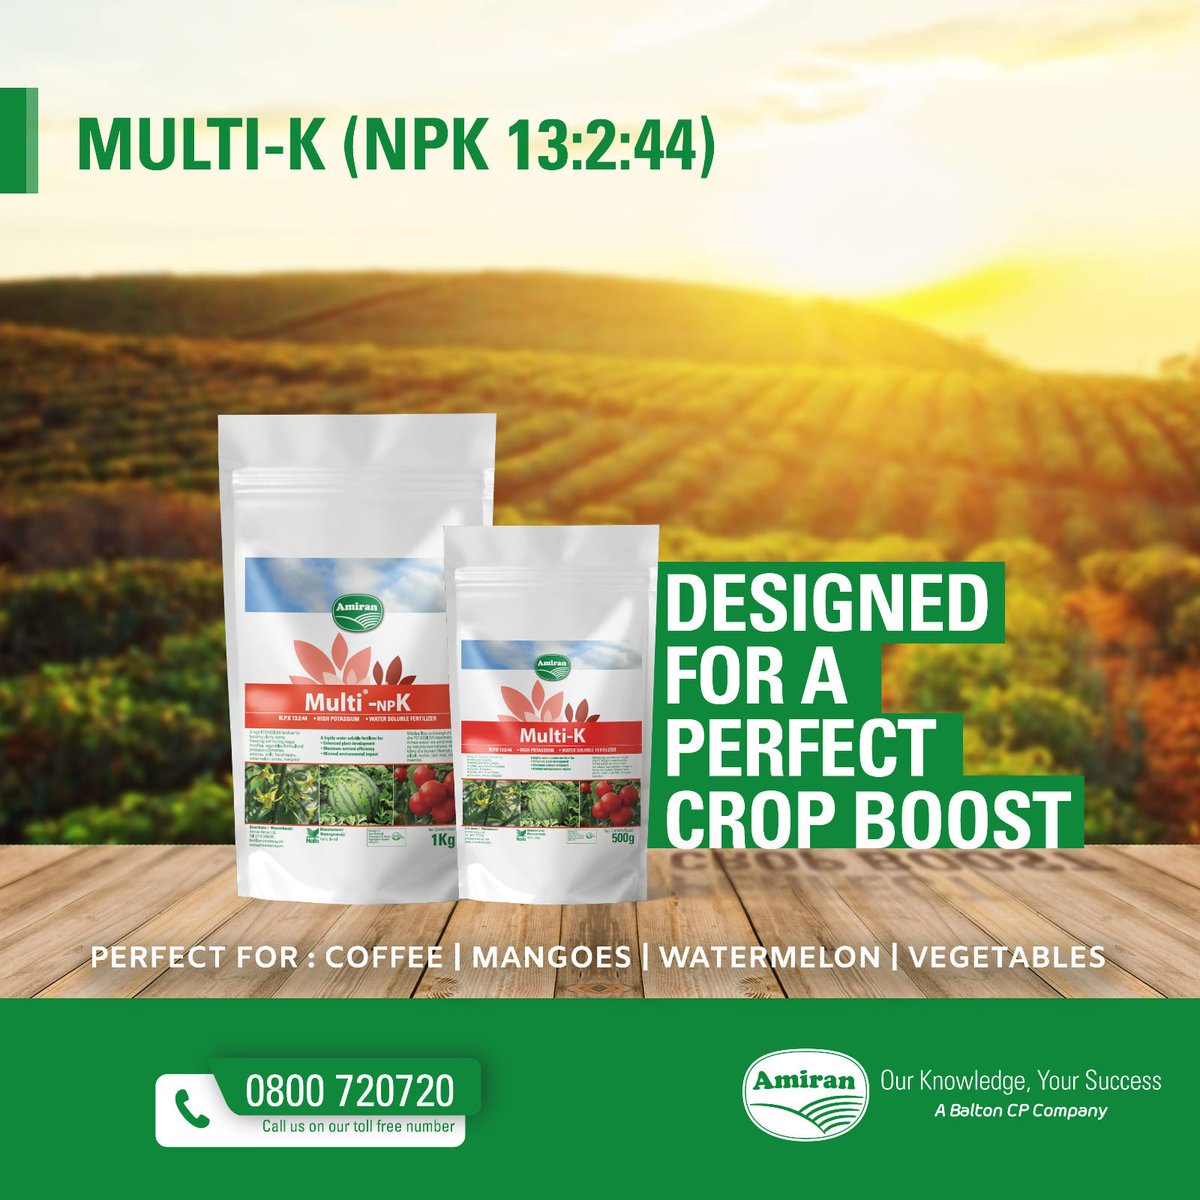 MULTI-K (NPK 13:2:44) IS BACK IN STOCK!! Multi-K is a high-potassium foliar fertilizer designed to boost your crops during flowering and fruiting stages., giving you: 📷Better nutrient absorption 📷Thriving flowering crops 📷Healthy fruits/ produce 📷 Increased yield quality